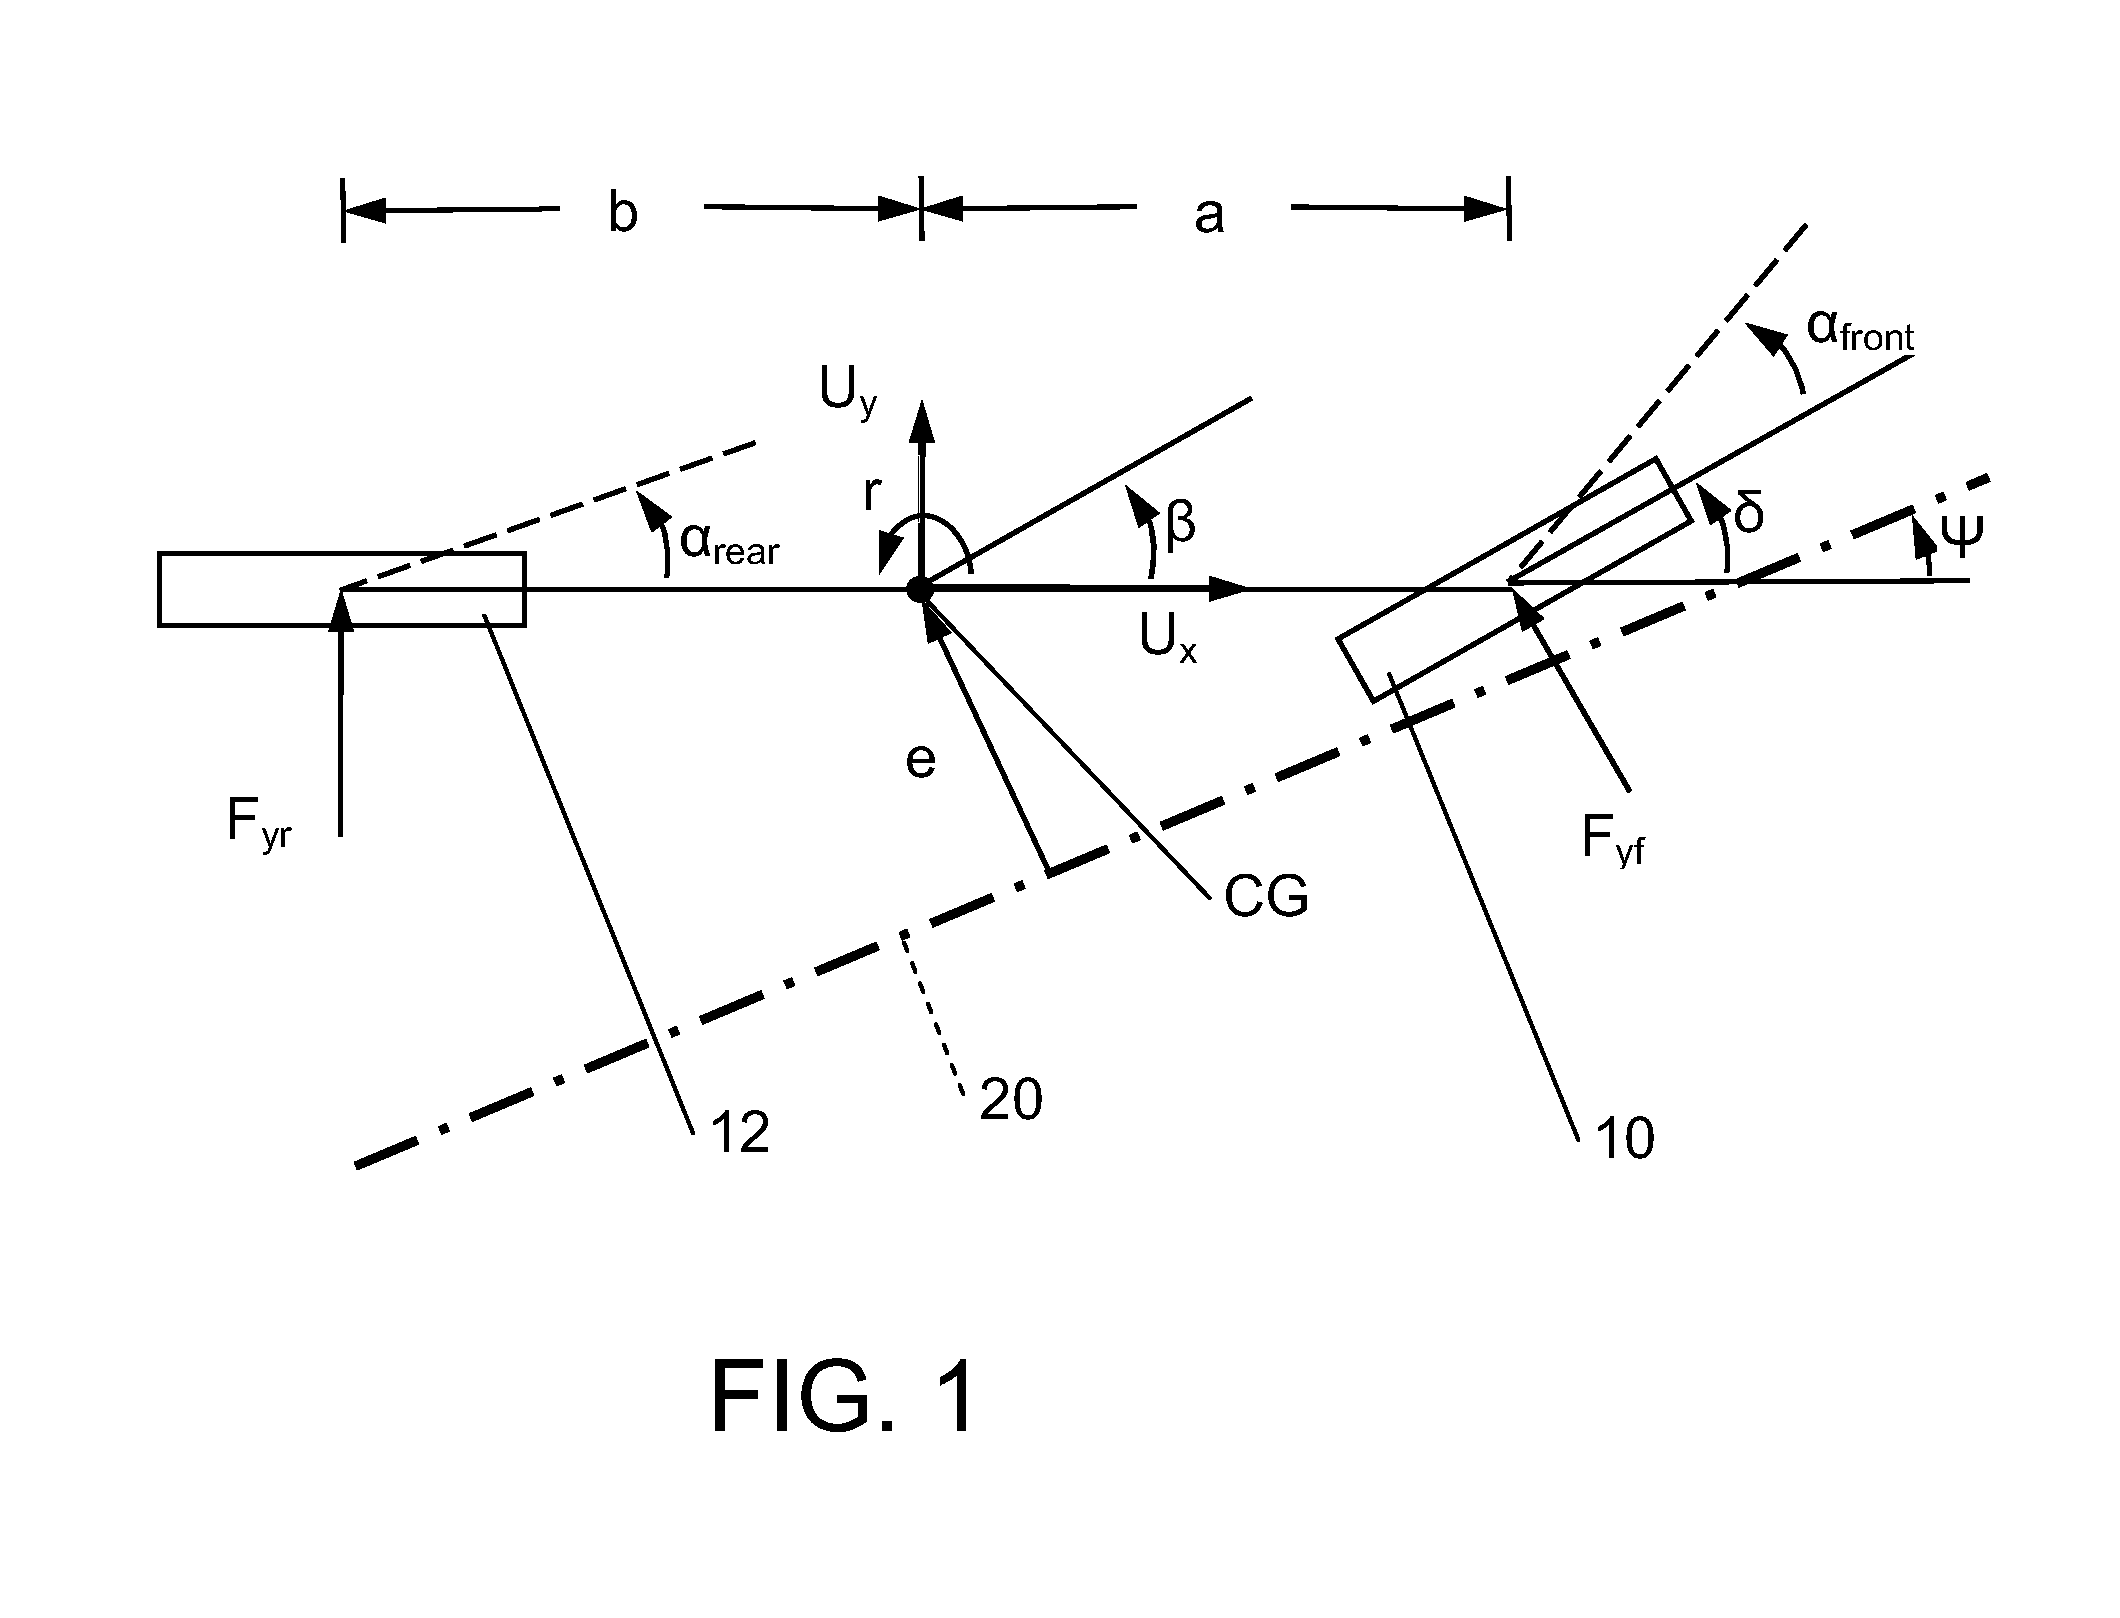 Method for Providing a Lanekeeping Assistance Based on Modifying Mechanical Sources of Steering Torques